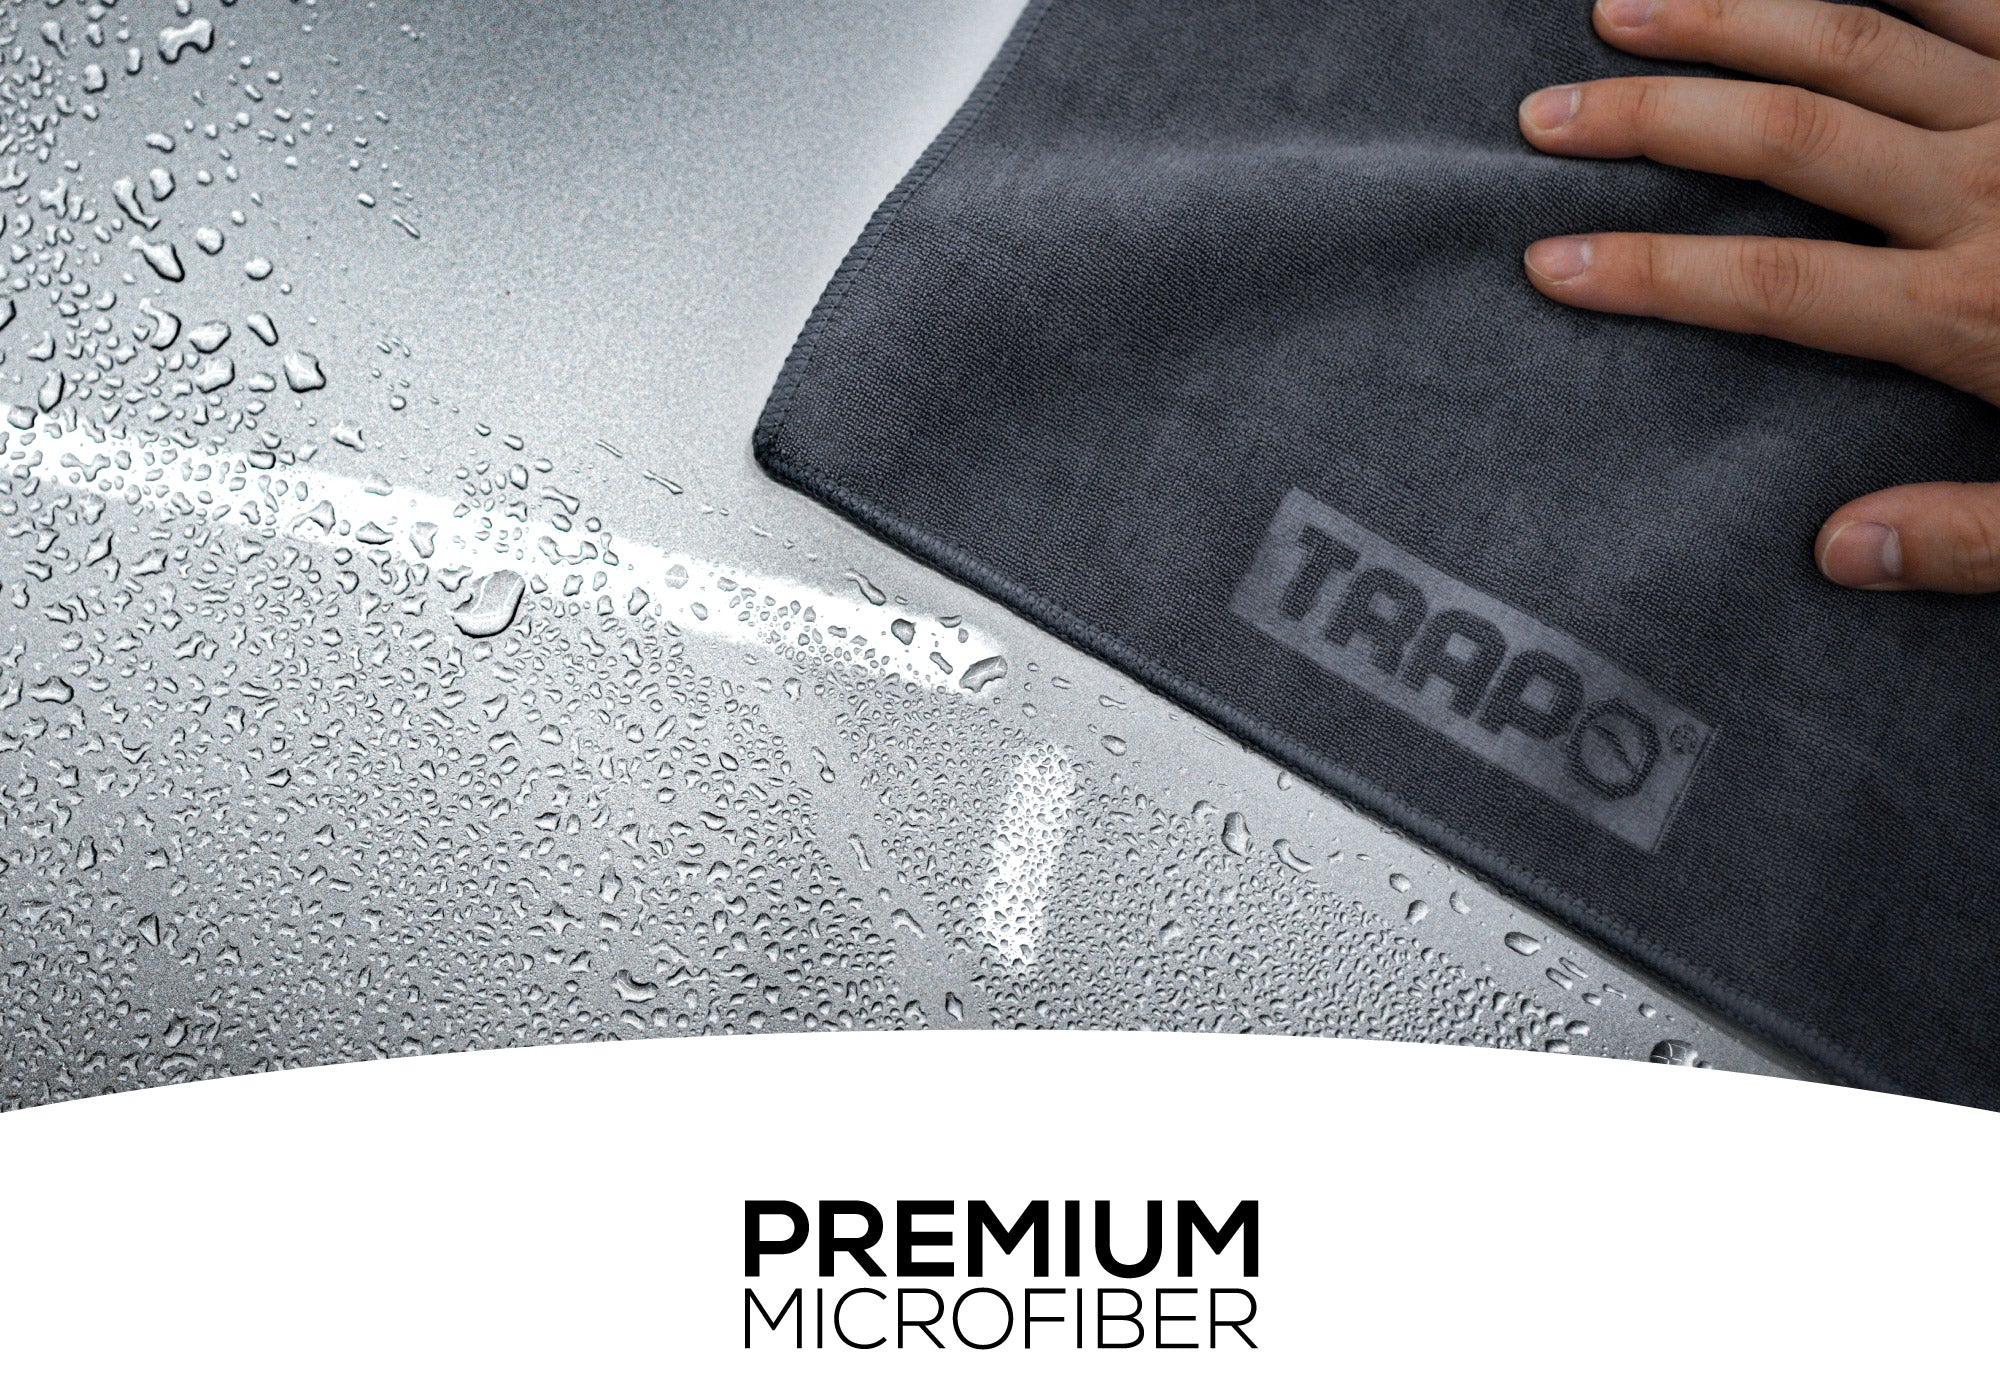 Premium Microfibre Trapo Premium Microfibre makes polishing effortless.Made of high-quality material, Trapo Premium Microfibre is specially designed to be durable, non-abrasive, and more absorbent than your average retail brand microfibre towels. Plus, it's lint-free! Suitable for use on any surface.